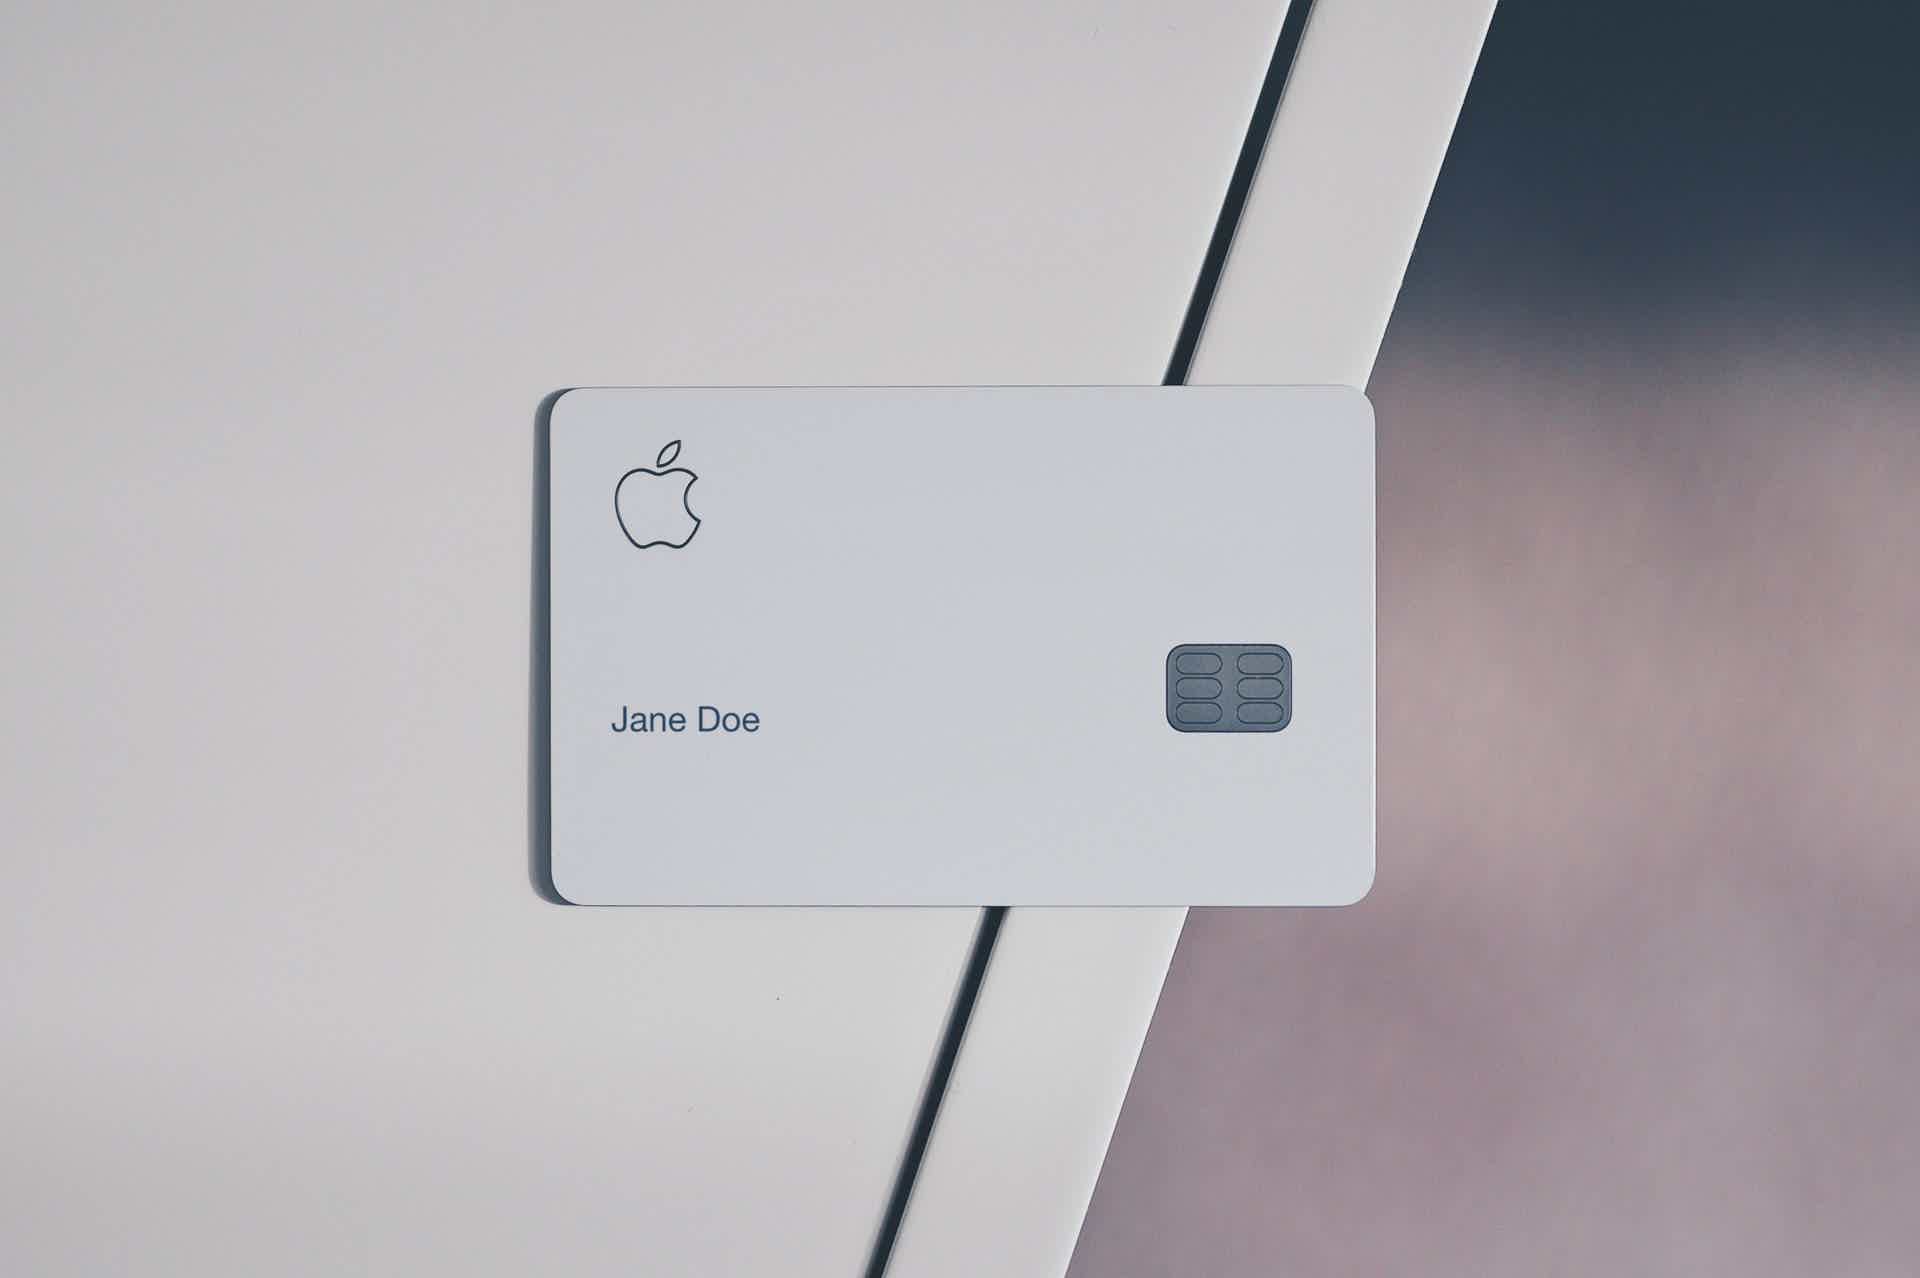 You can get exclusive perks for Apple products! Source: Unsplash